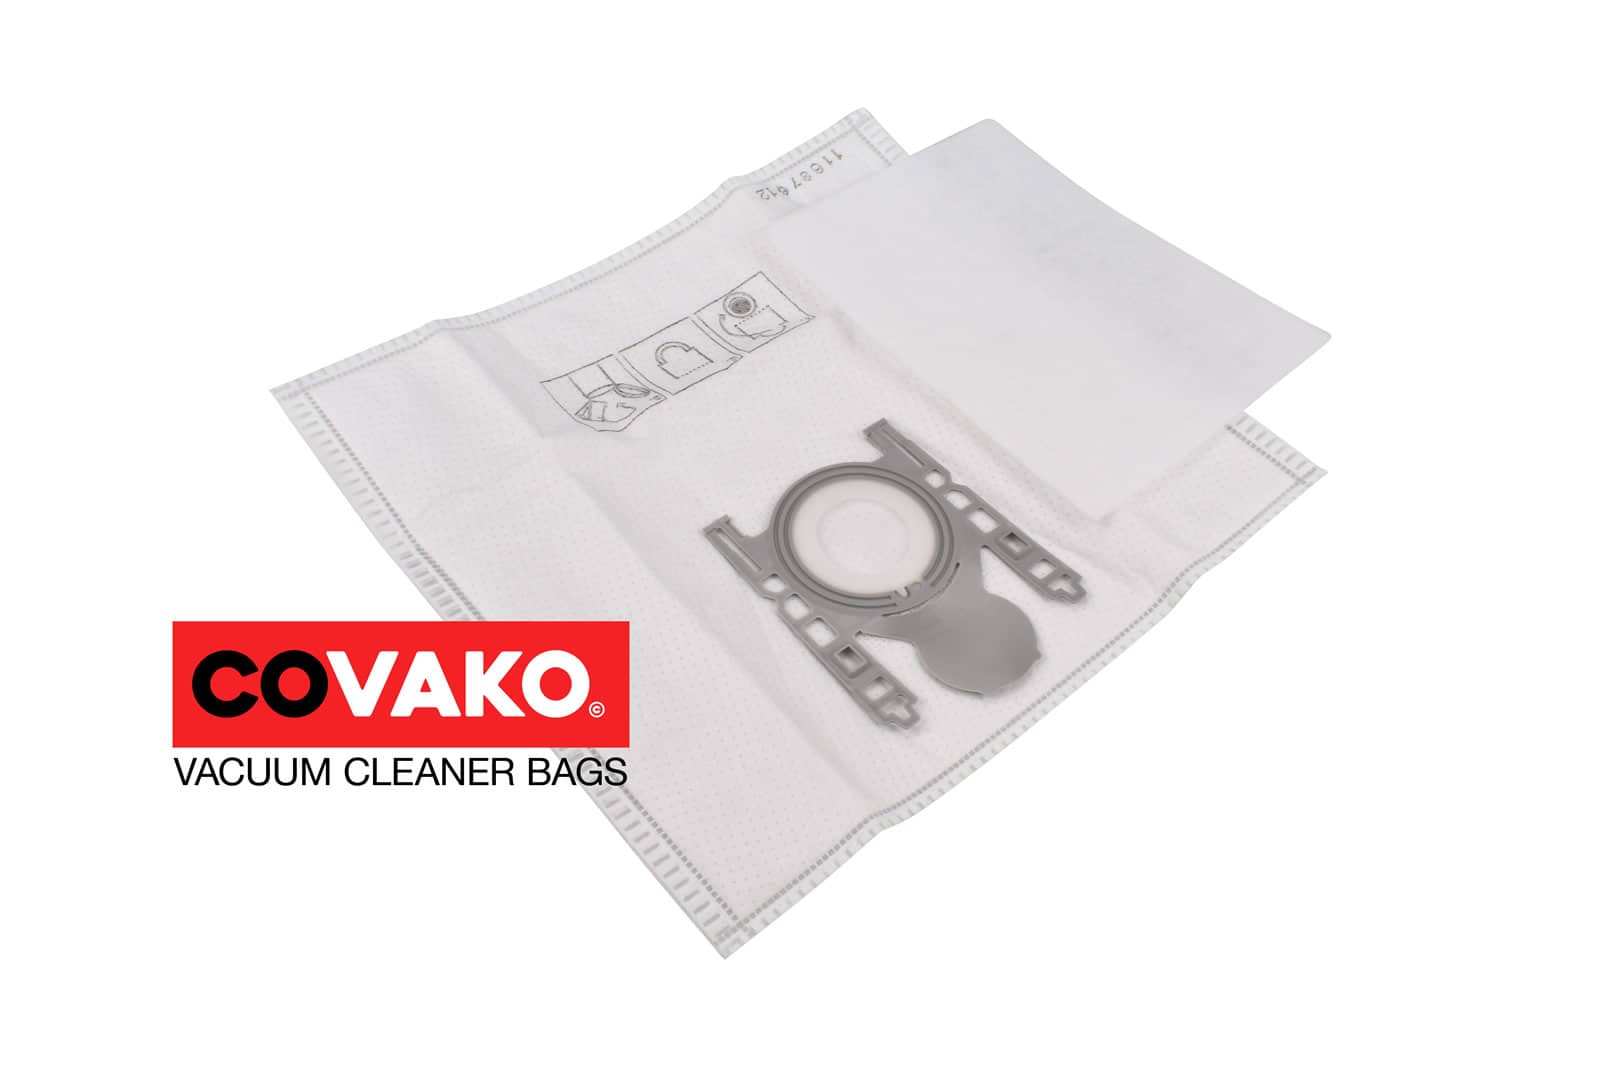 Bosch BSGL 4… / Synthesis - Bosch vacuum cleaner bags